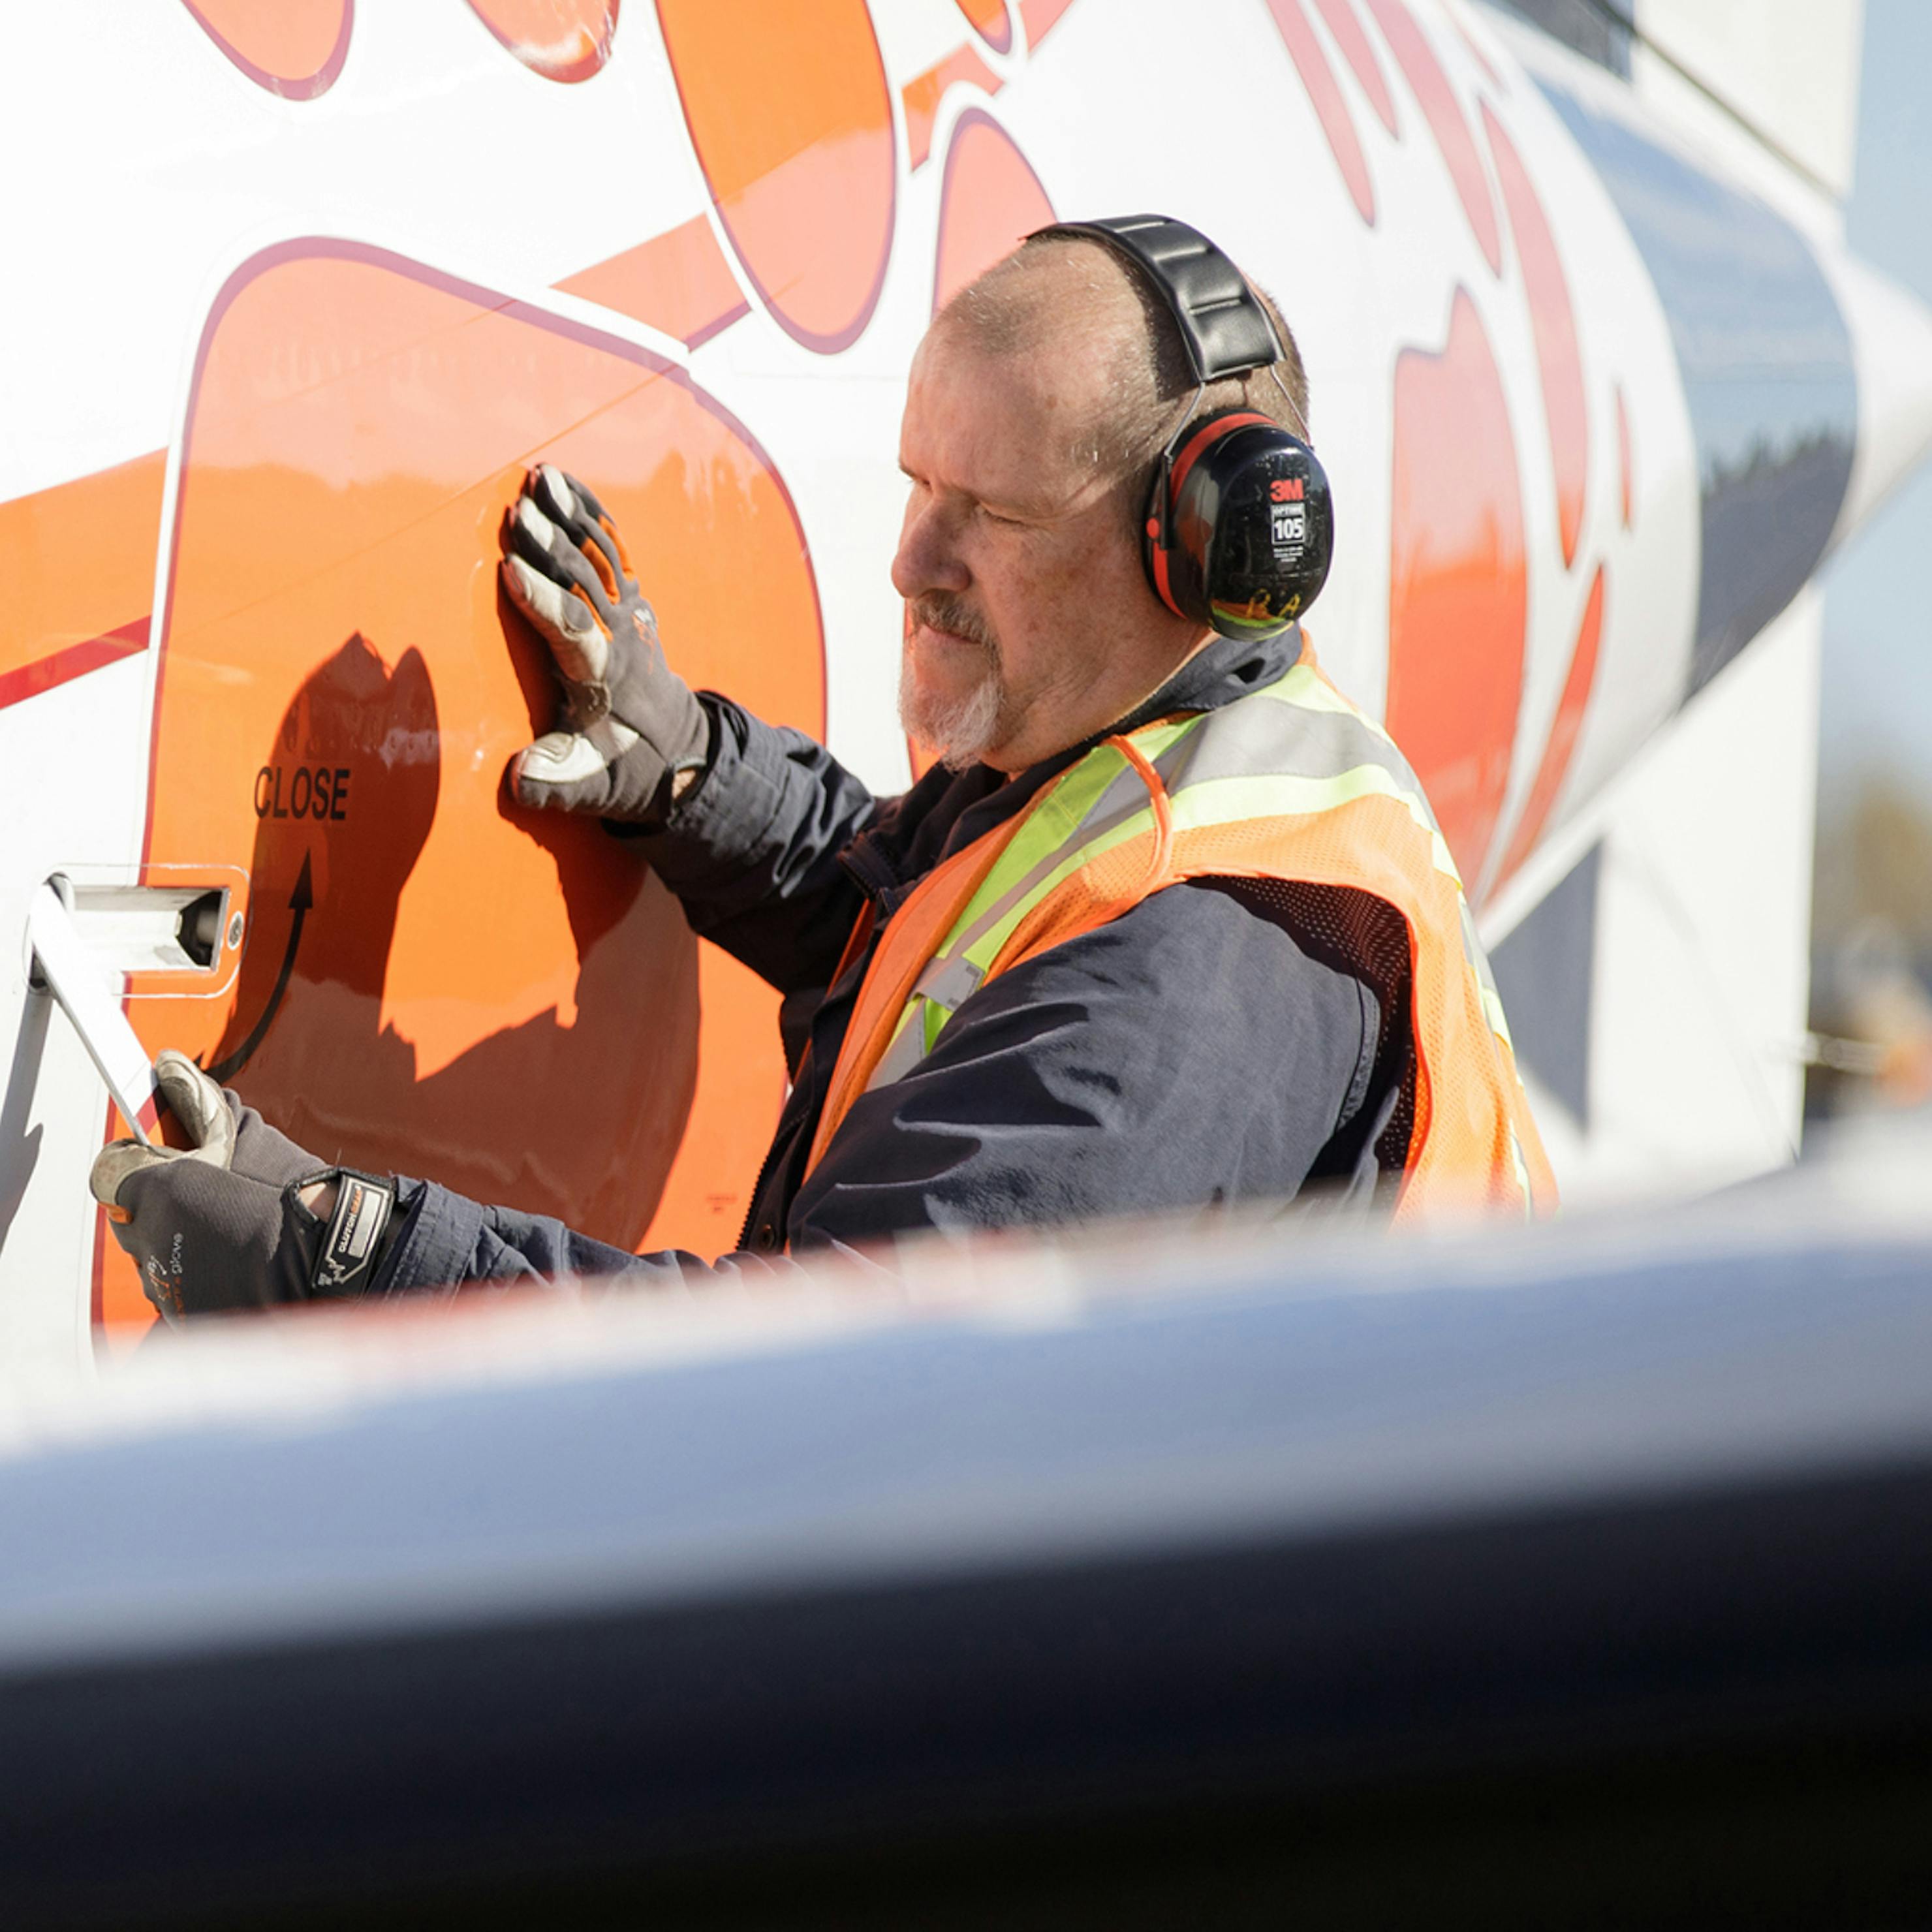 Man closing the cargo door on an aircraft while wearing hearing protection.